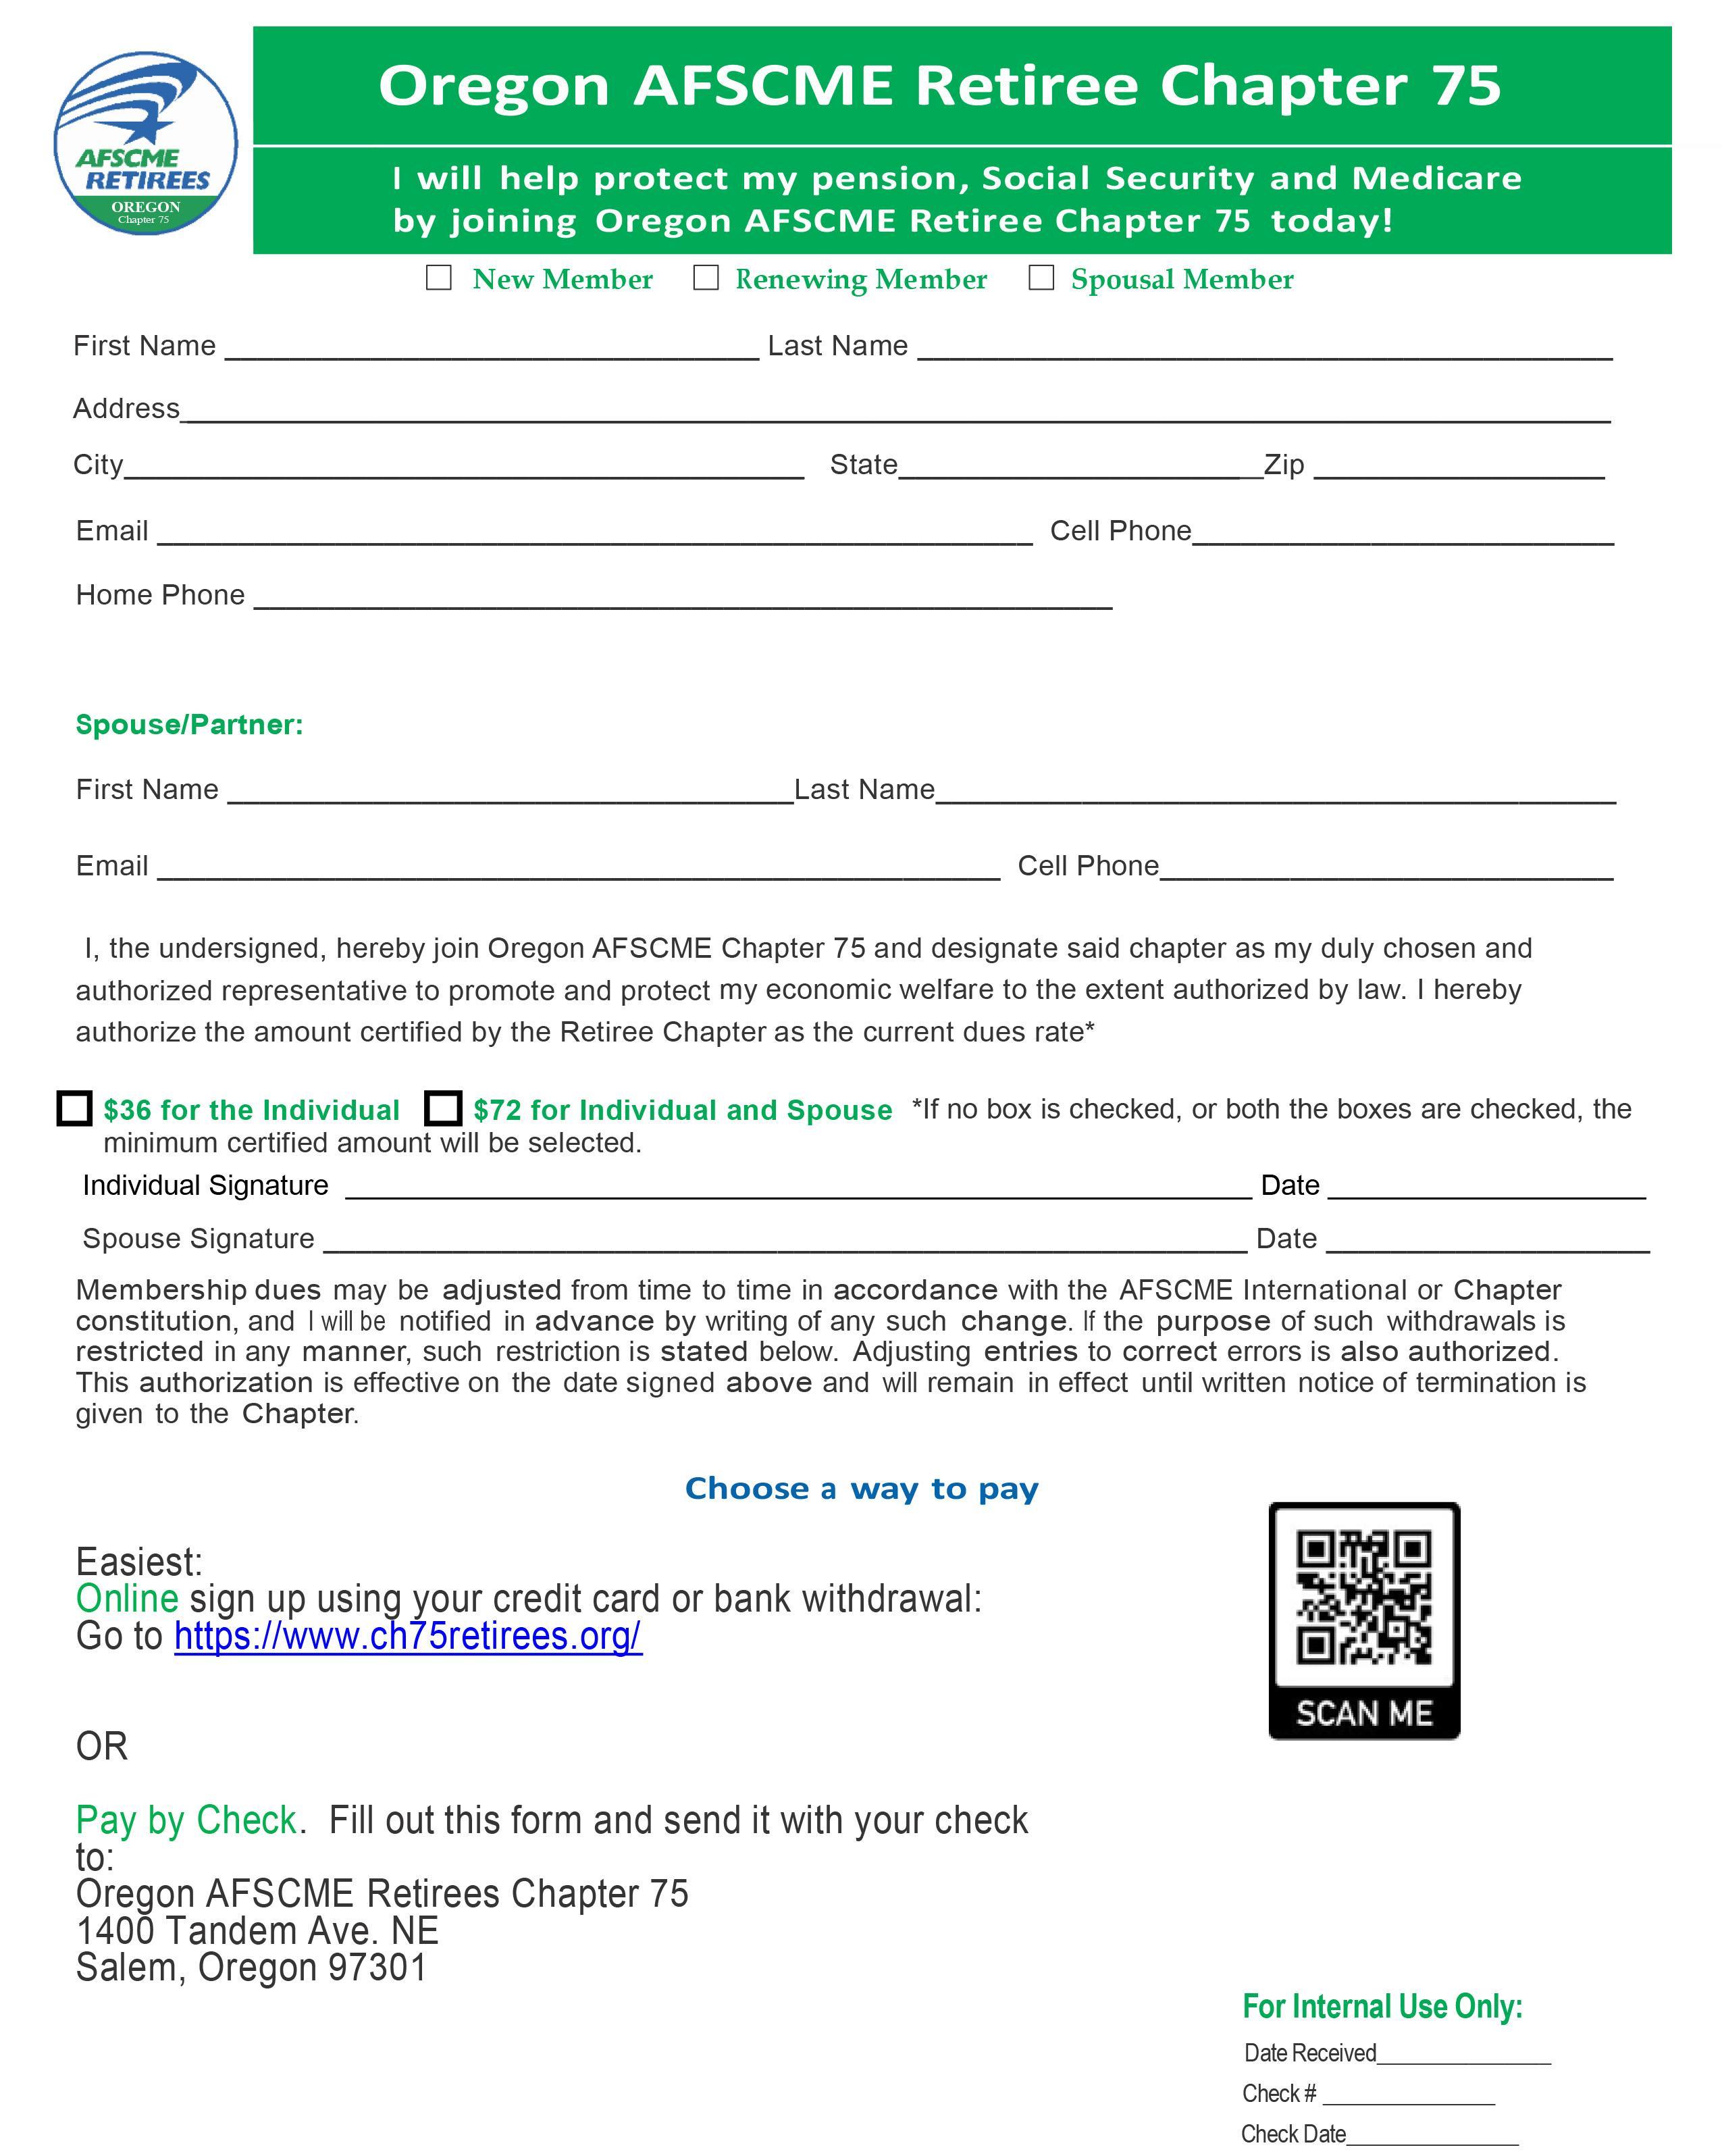 A membership application for the Oregon AFSCME Retirees Chapter